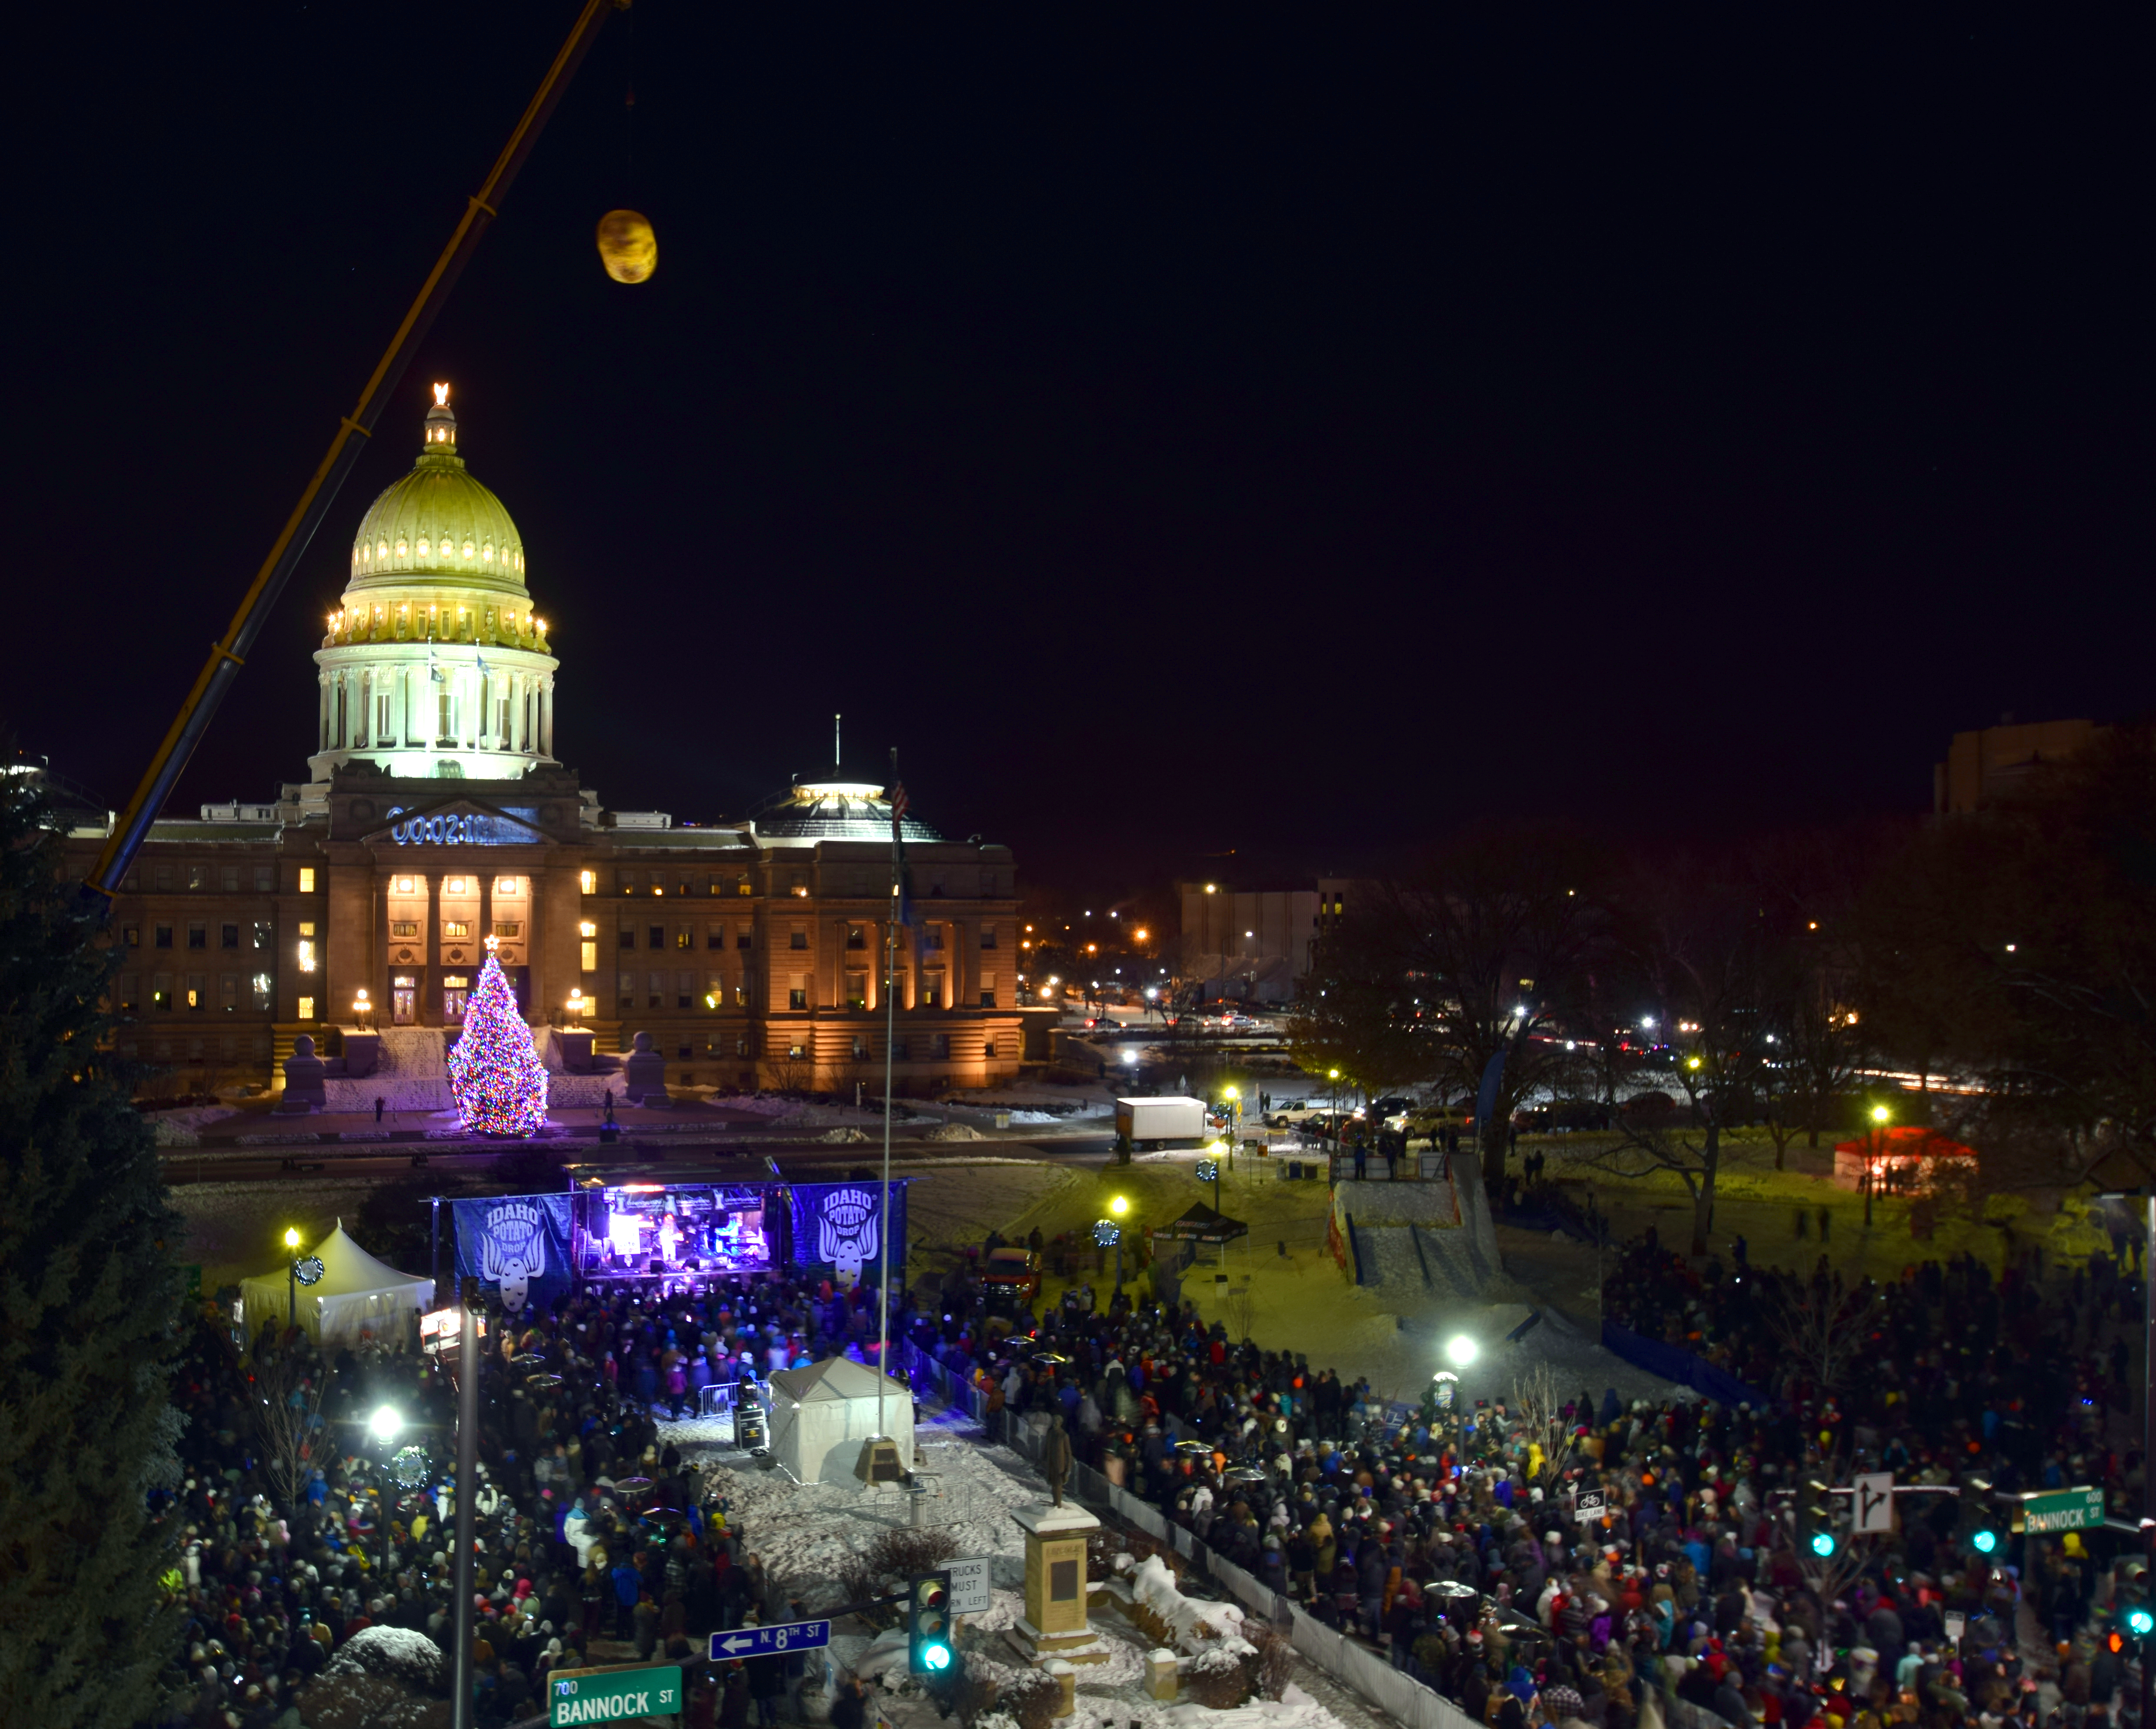 Pictures if the 2016 Idaho Potato Drop in Boise, Idaho. Photo by Terry Welch.